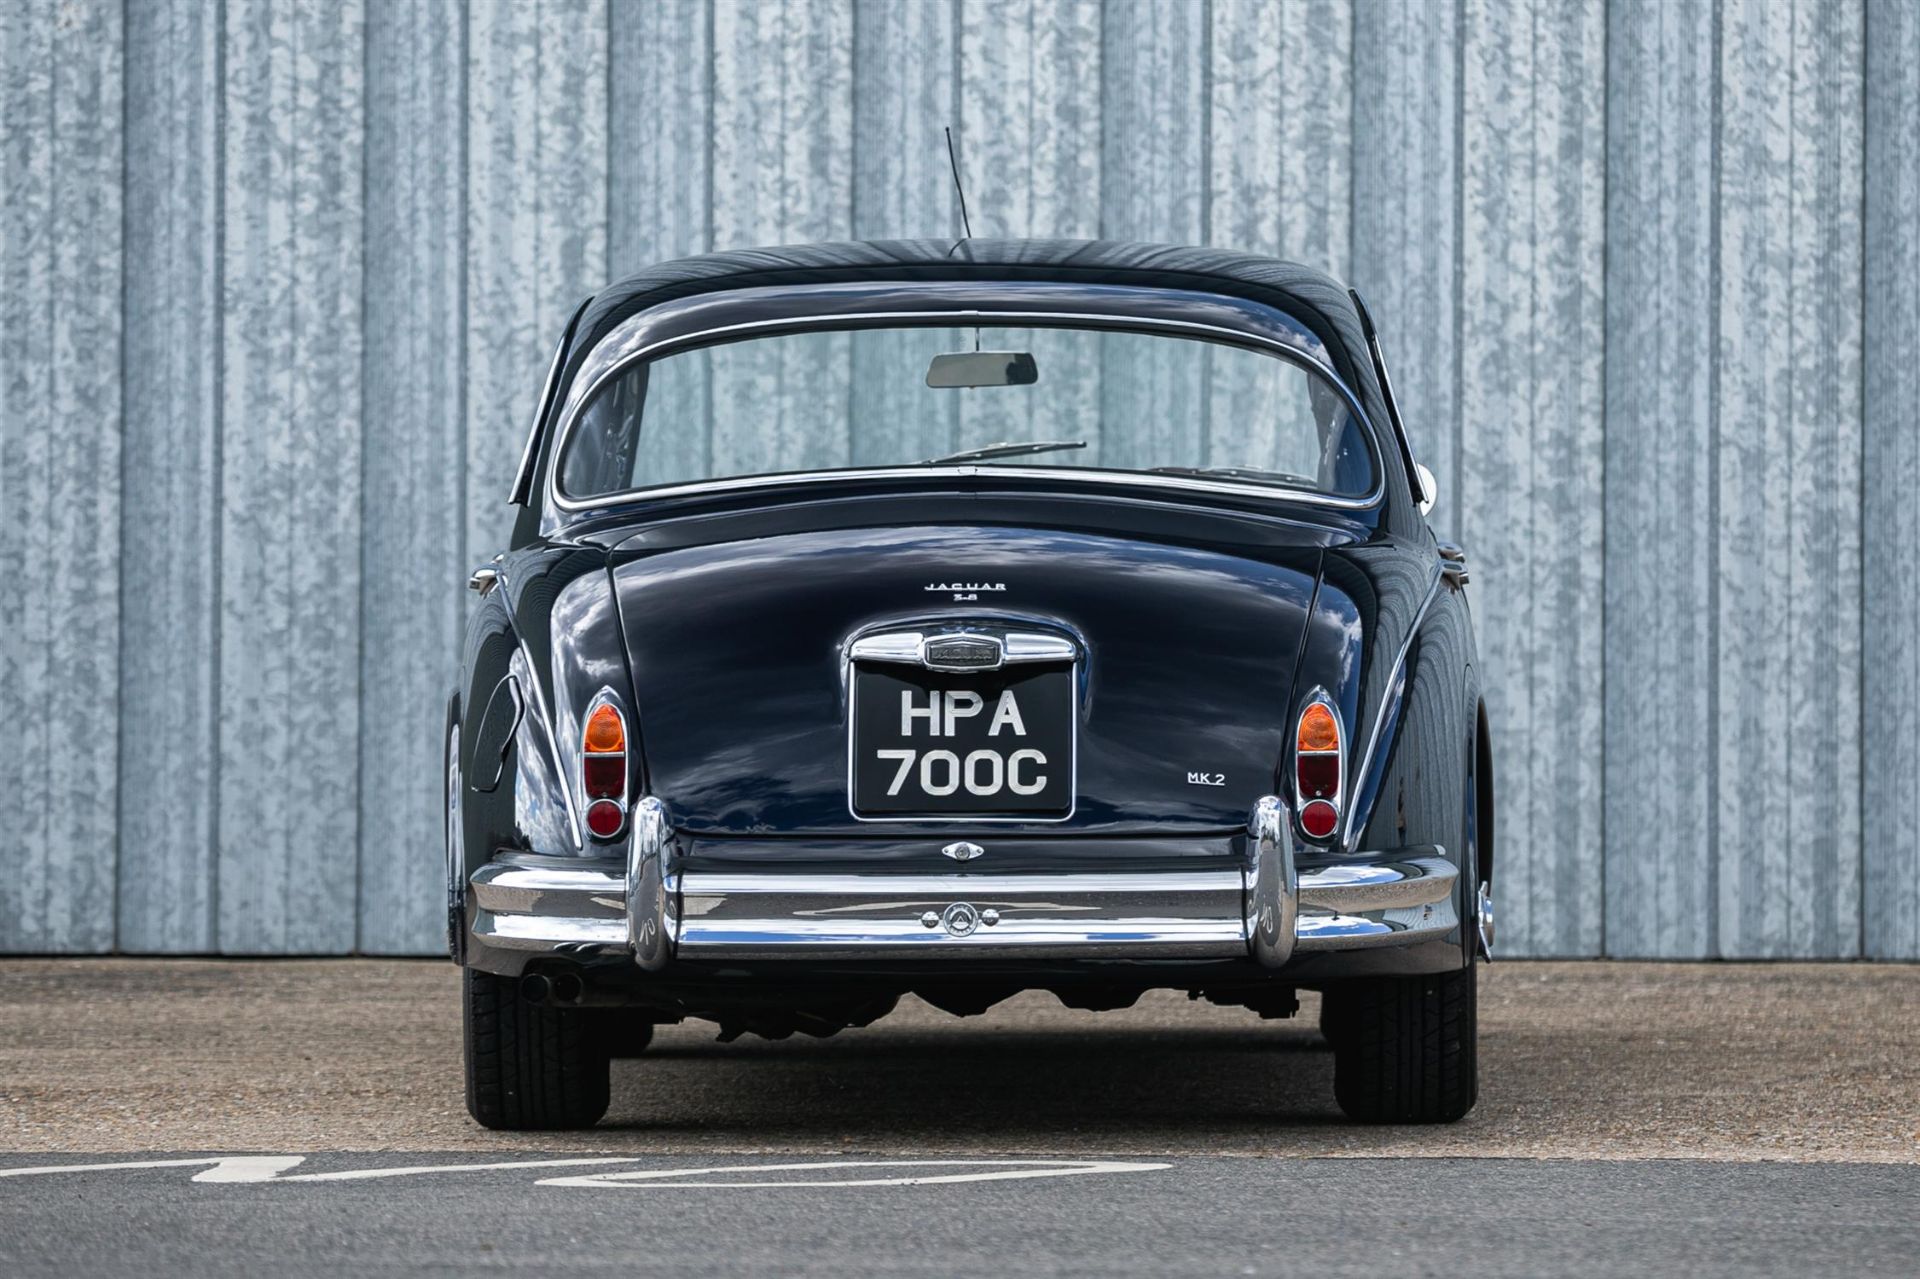 1964 Jaguar Mk2 3.8-Litre 'Coombs'-Style Sports Saloon - Image 7 of 10